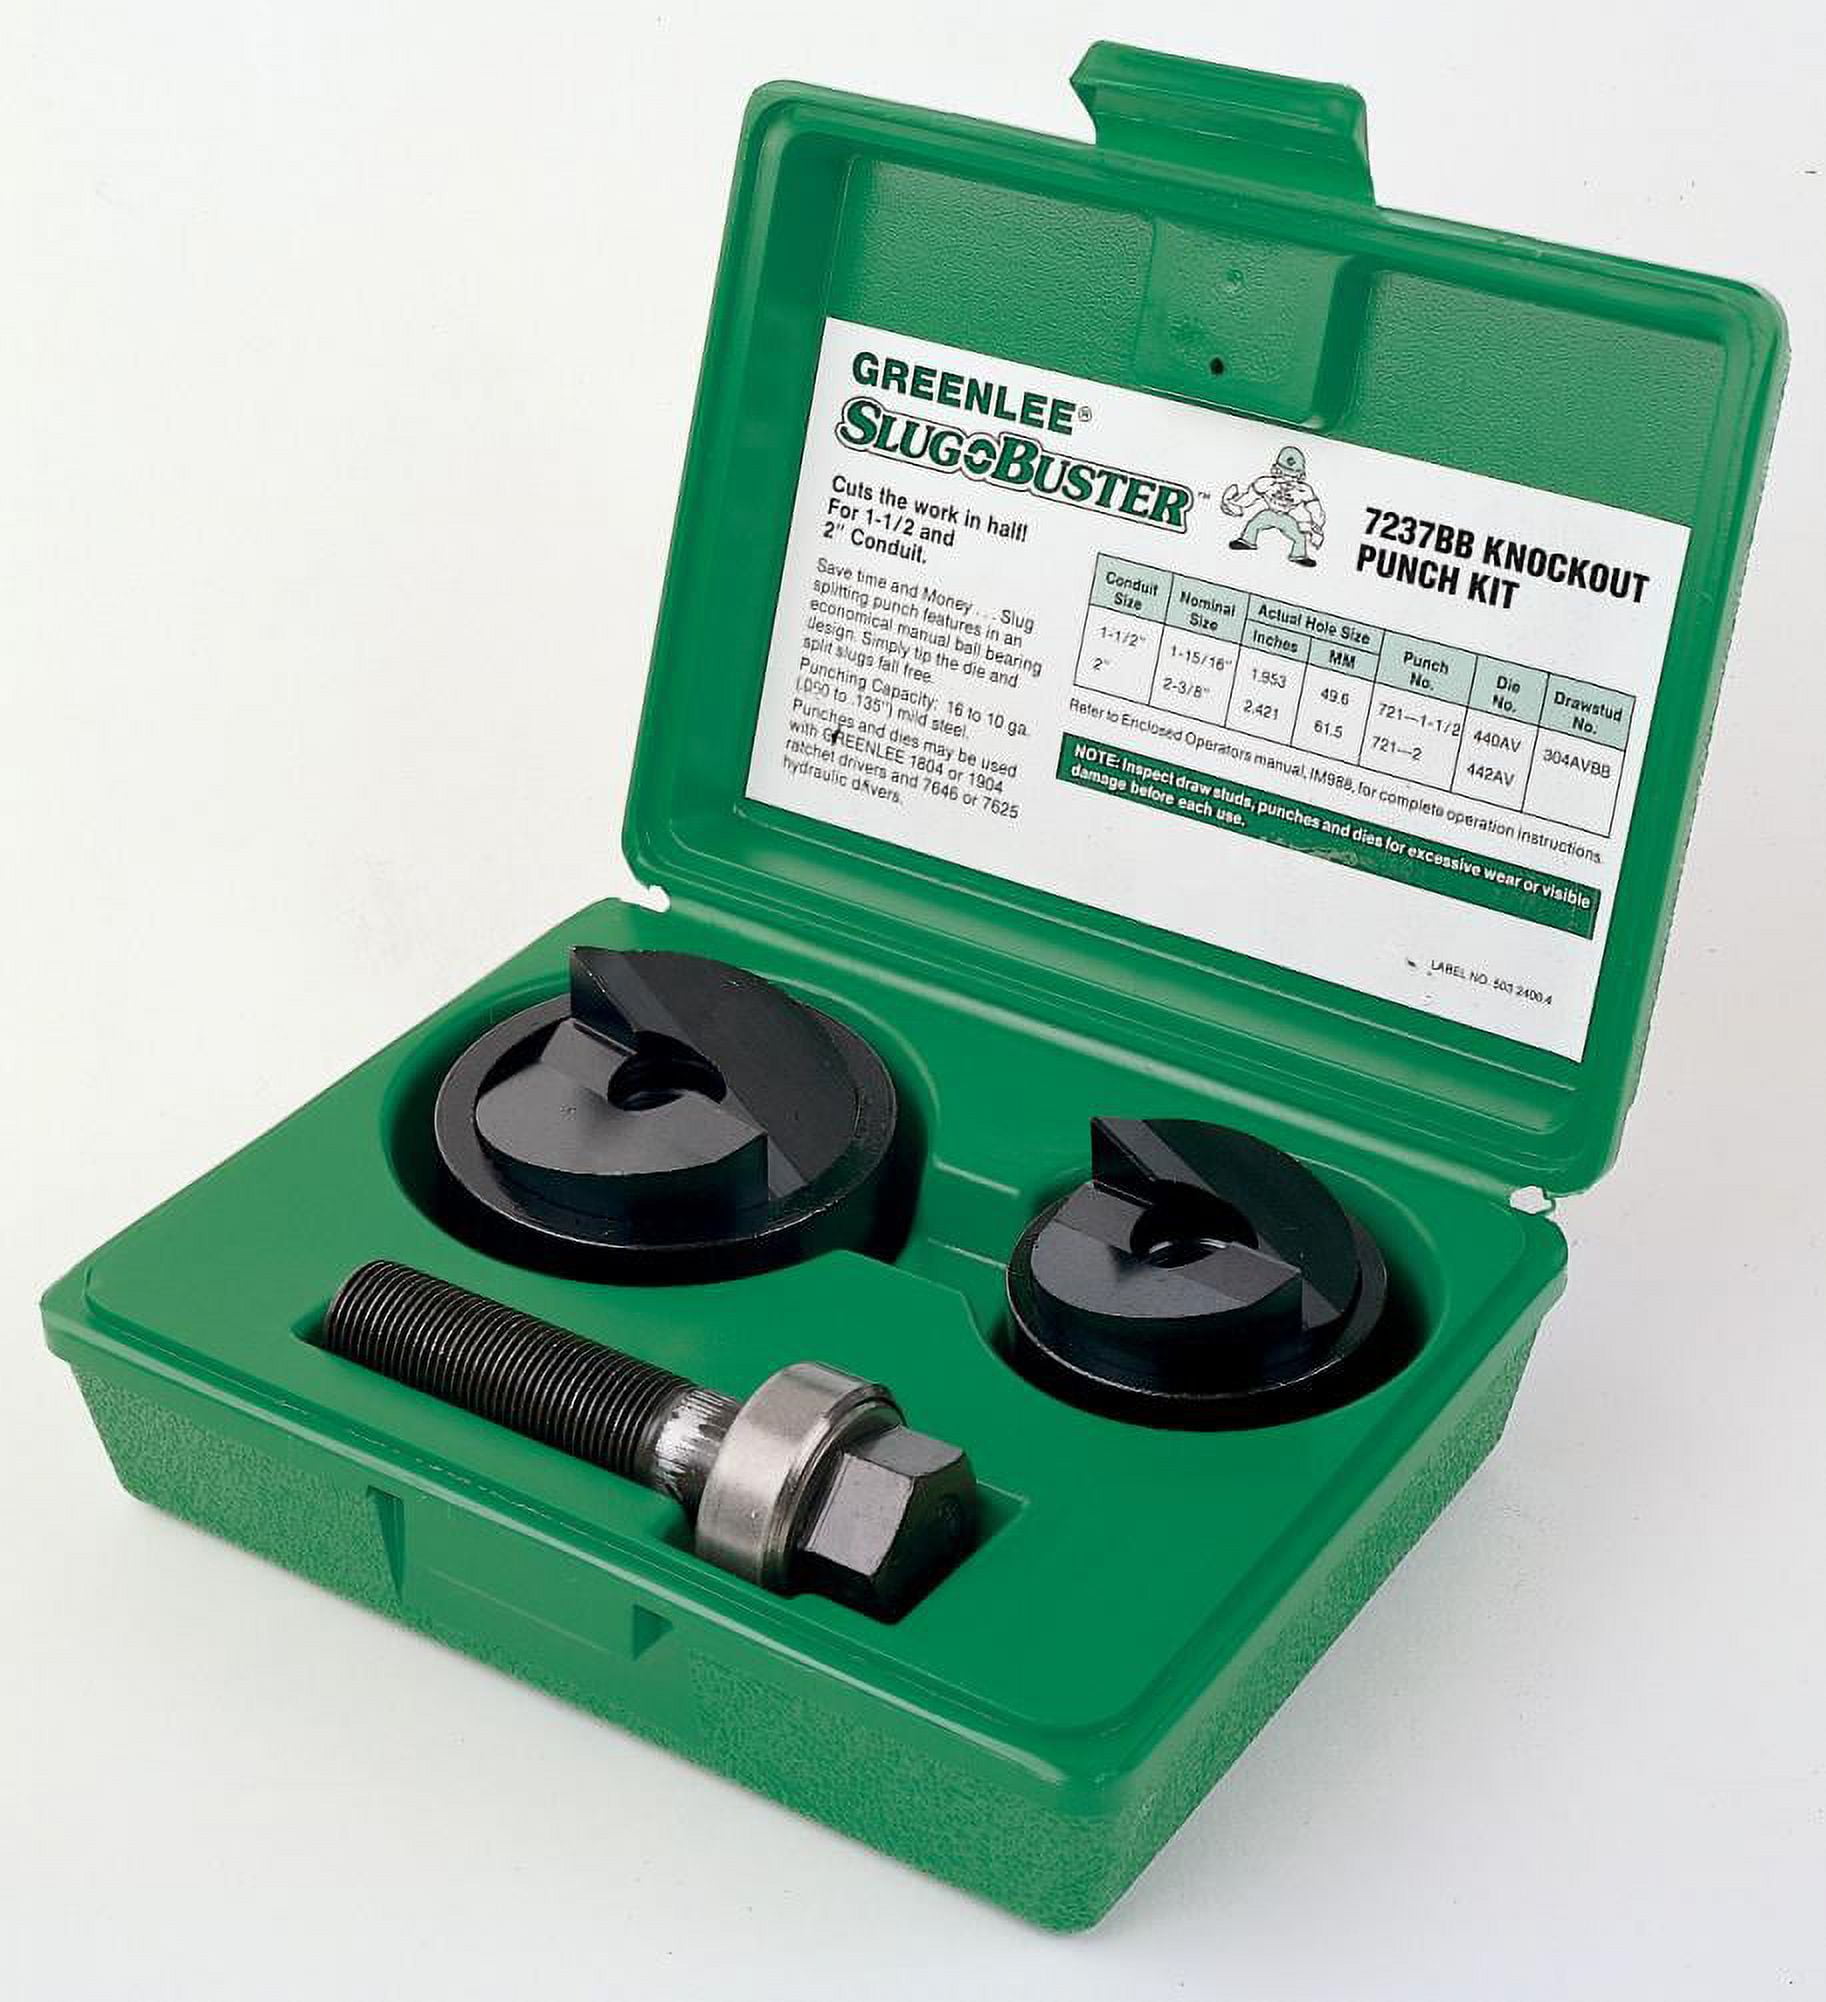 Greenlee Tools 721-1/2 Knockout Punches